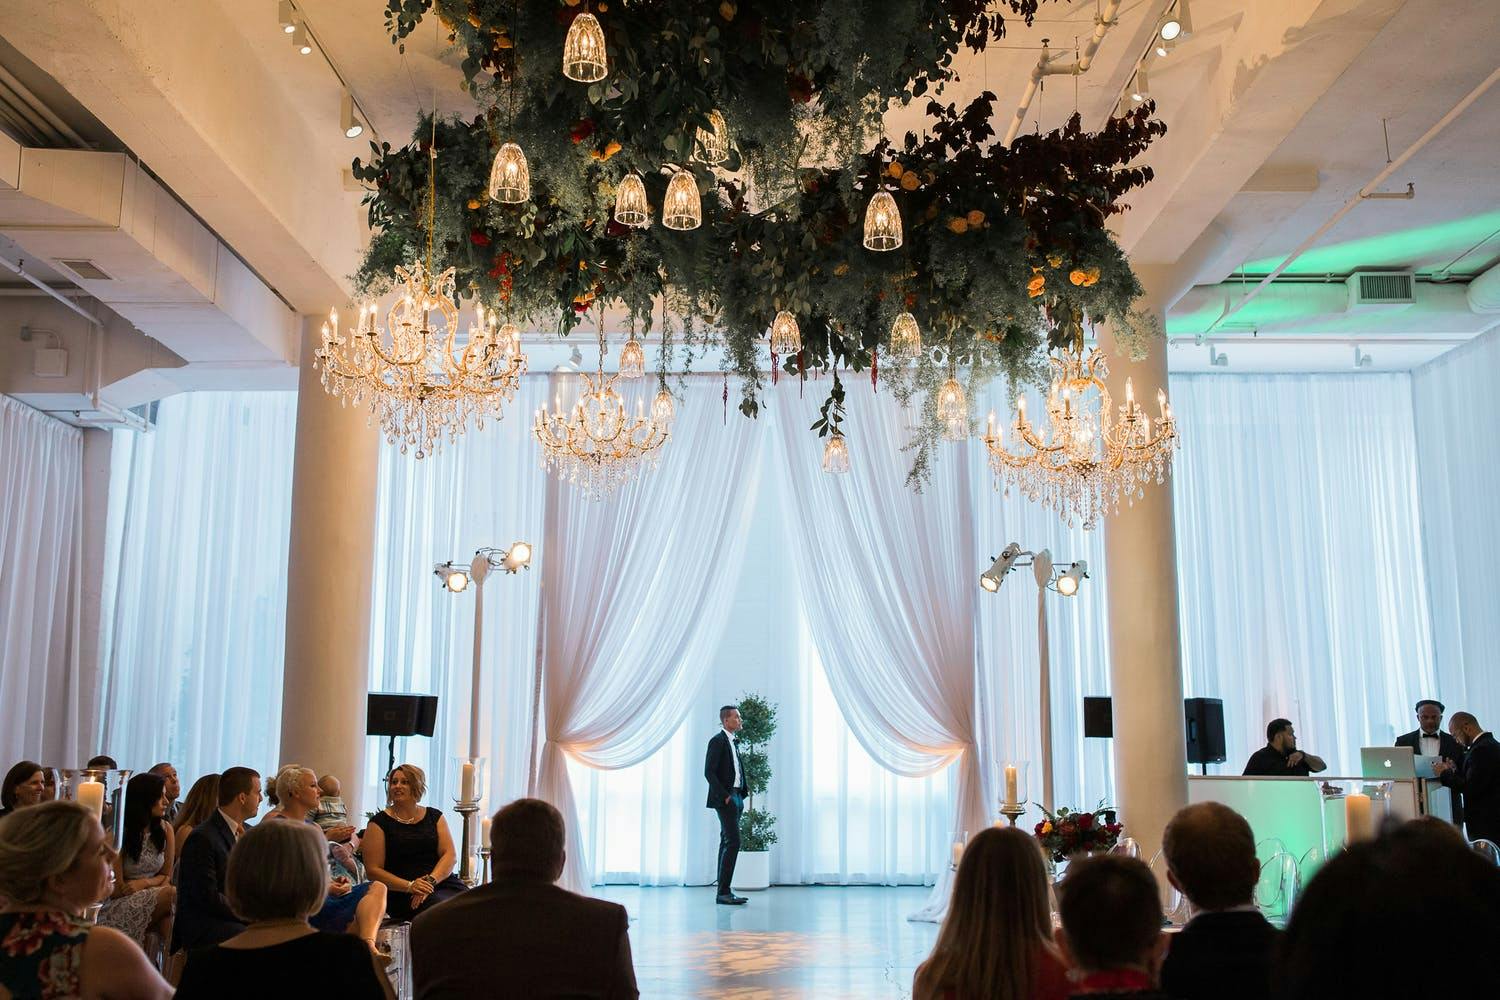 White Wedding Ceremony With Pillars, Sheer Draper, and Ceiling Installation of Greenery and Lighting | PartySlate